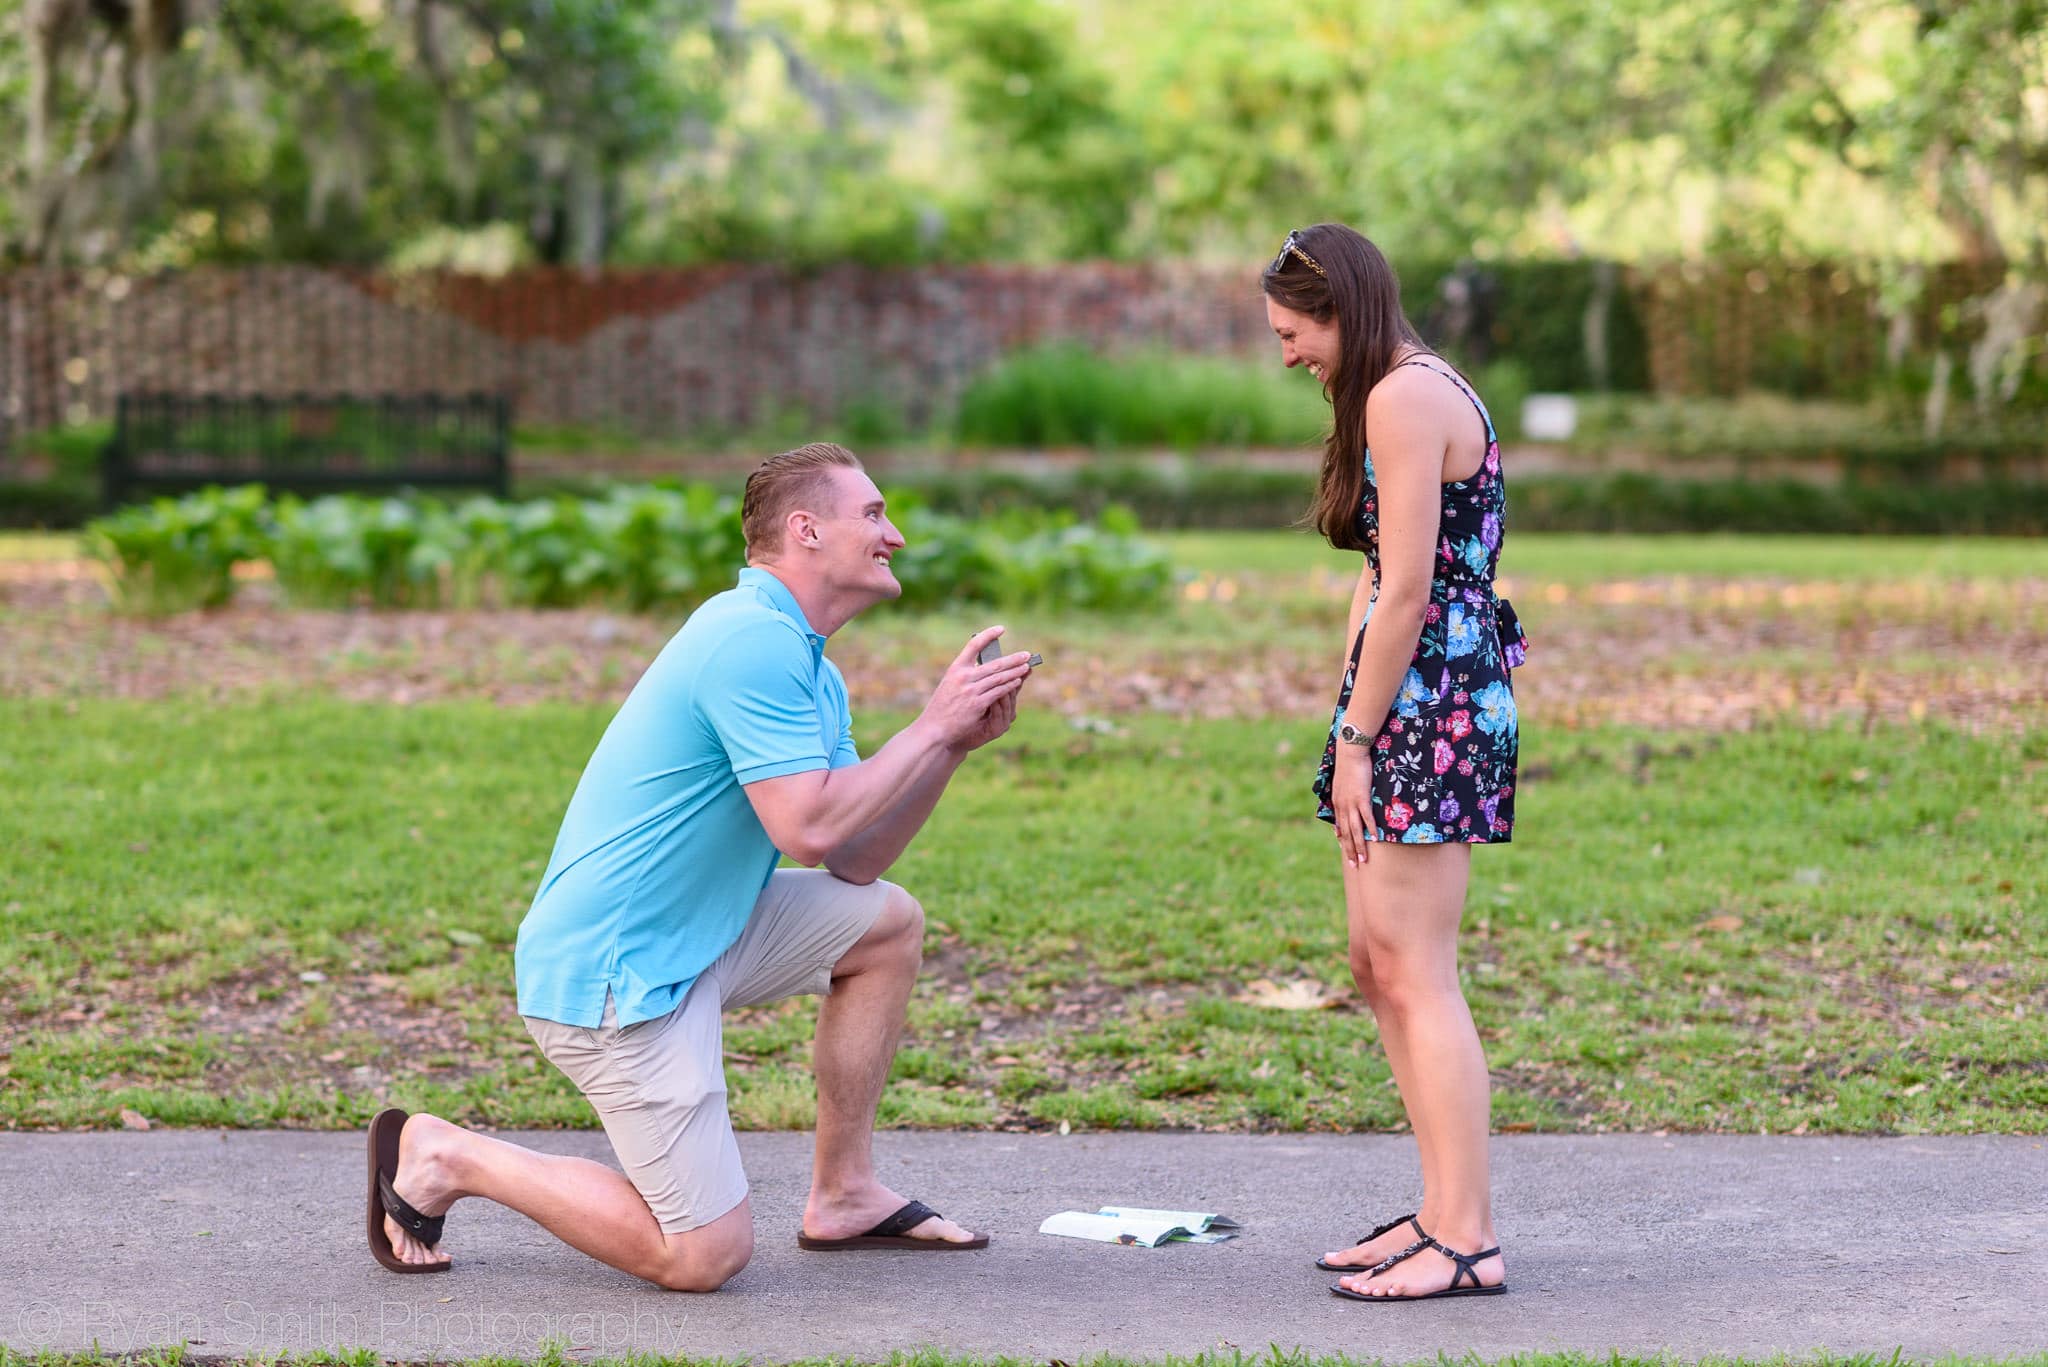 Down on one knee showing the ring - Brookgreen Gardens